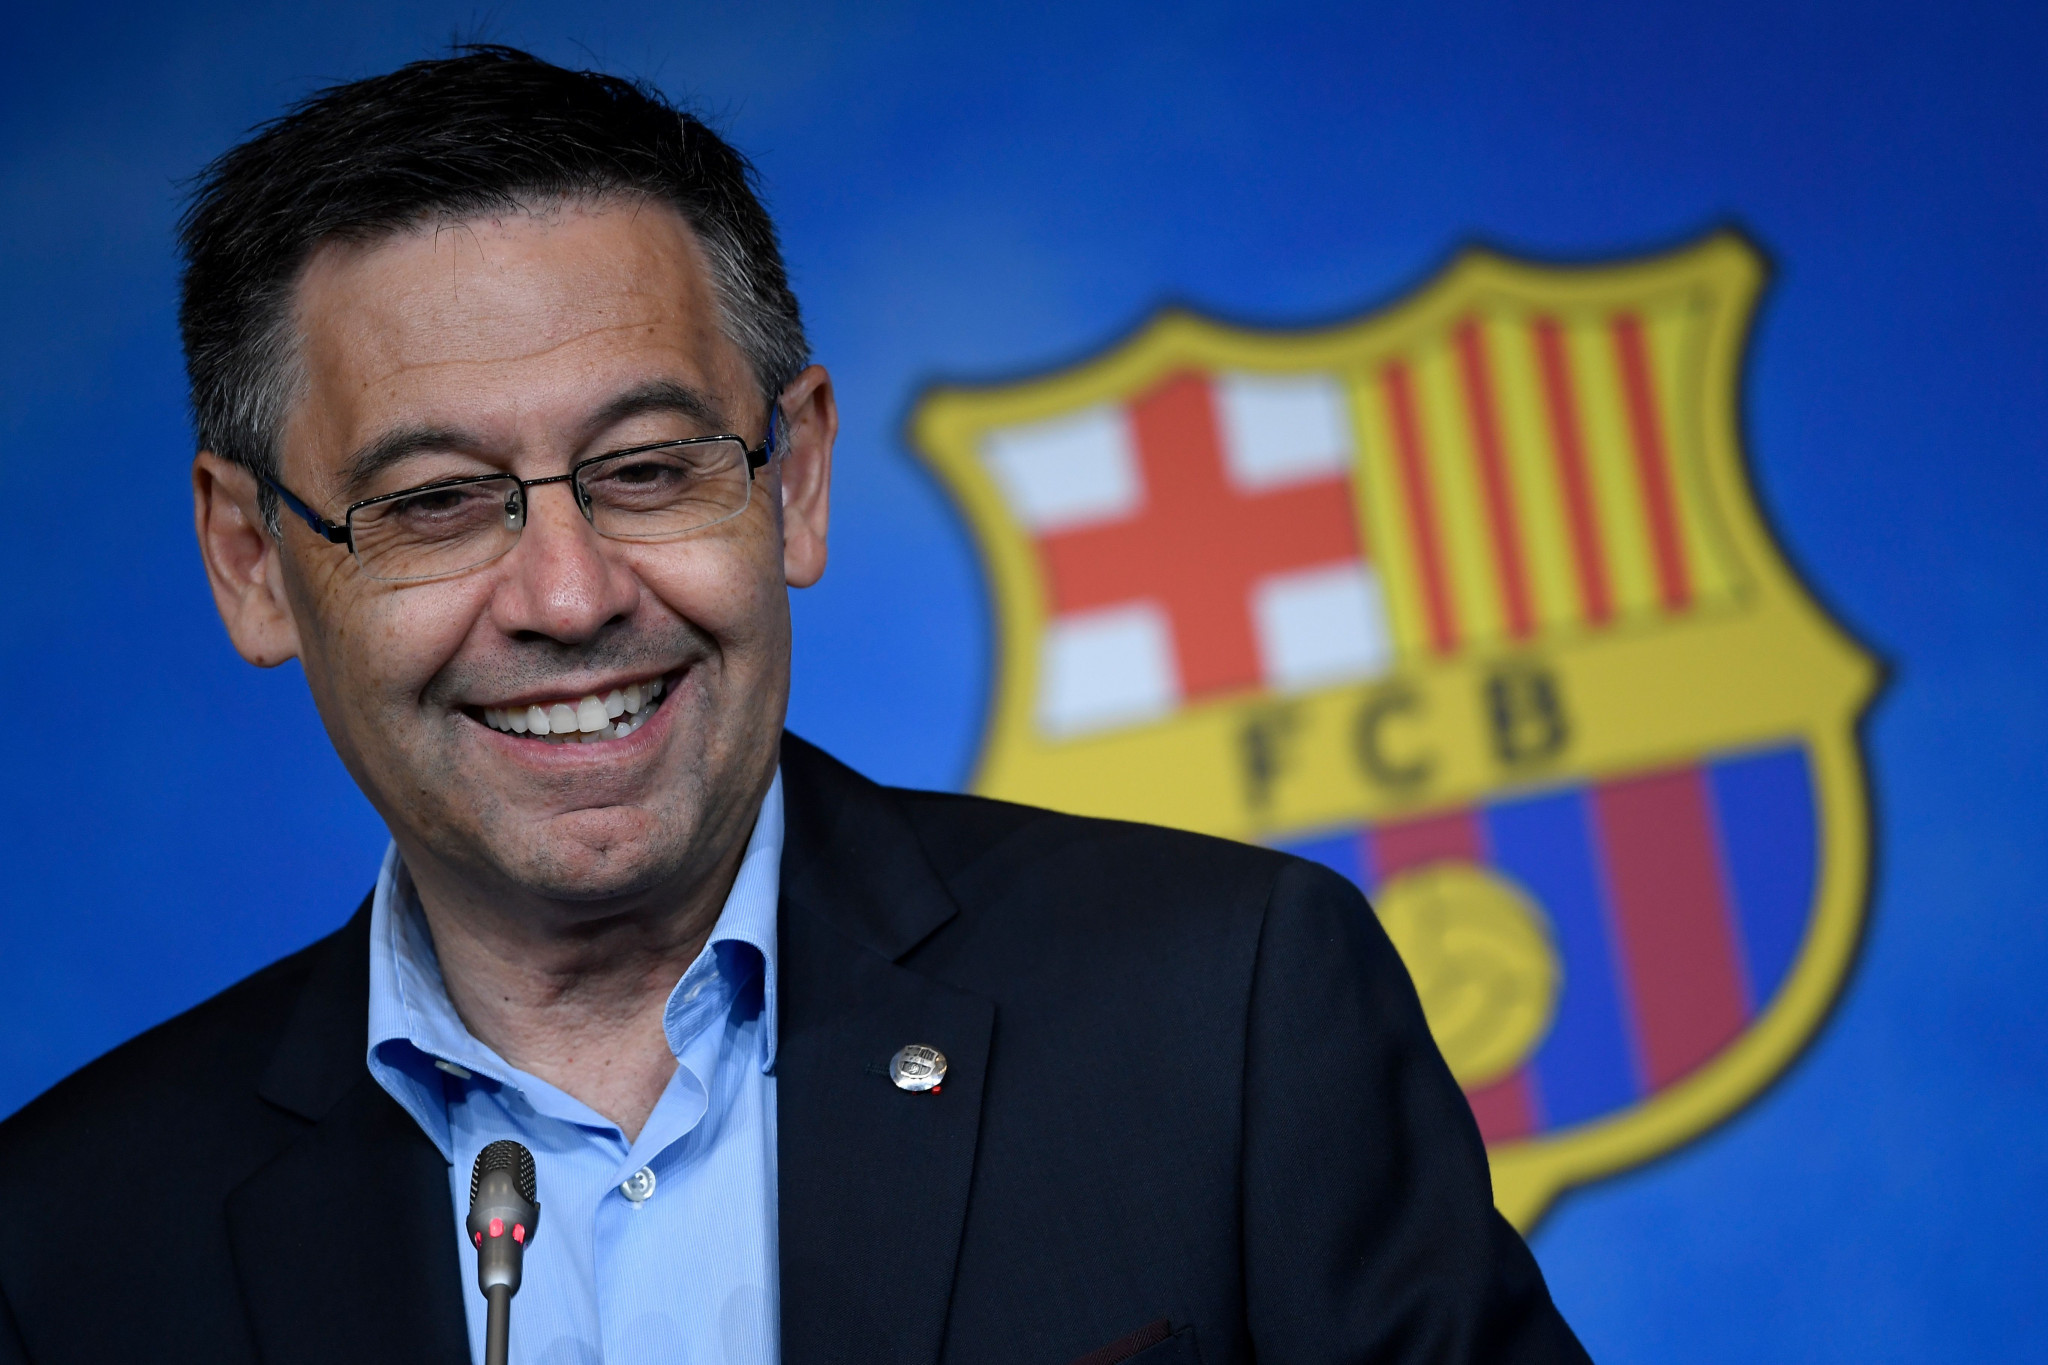 FC Barcelona President says club will not participate in "violent" esports games